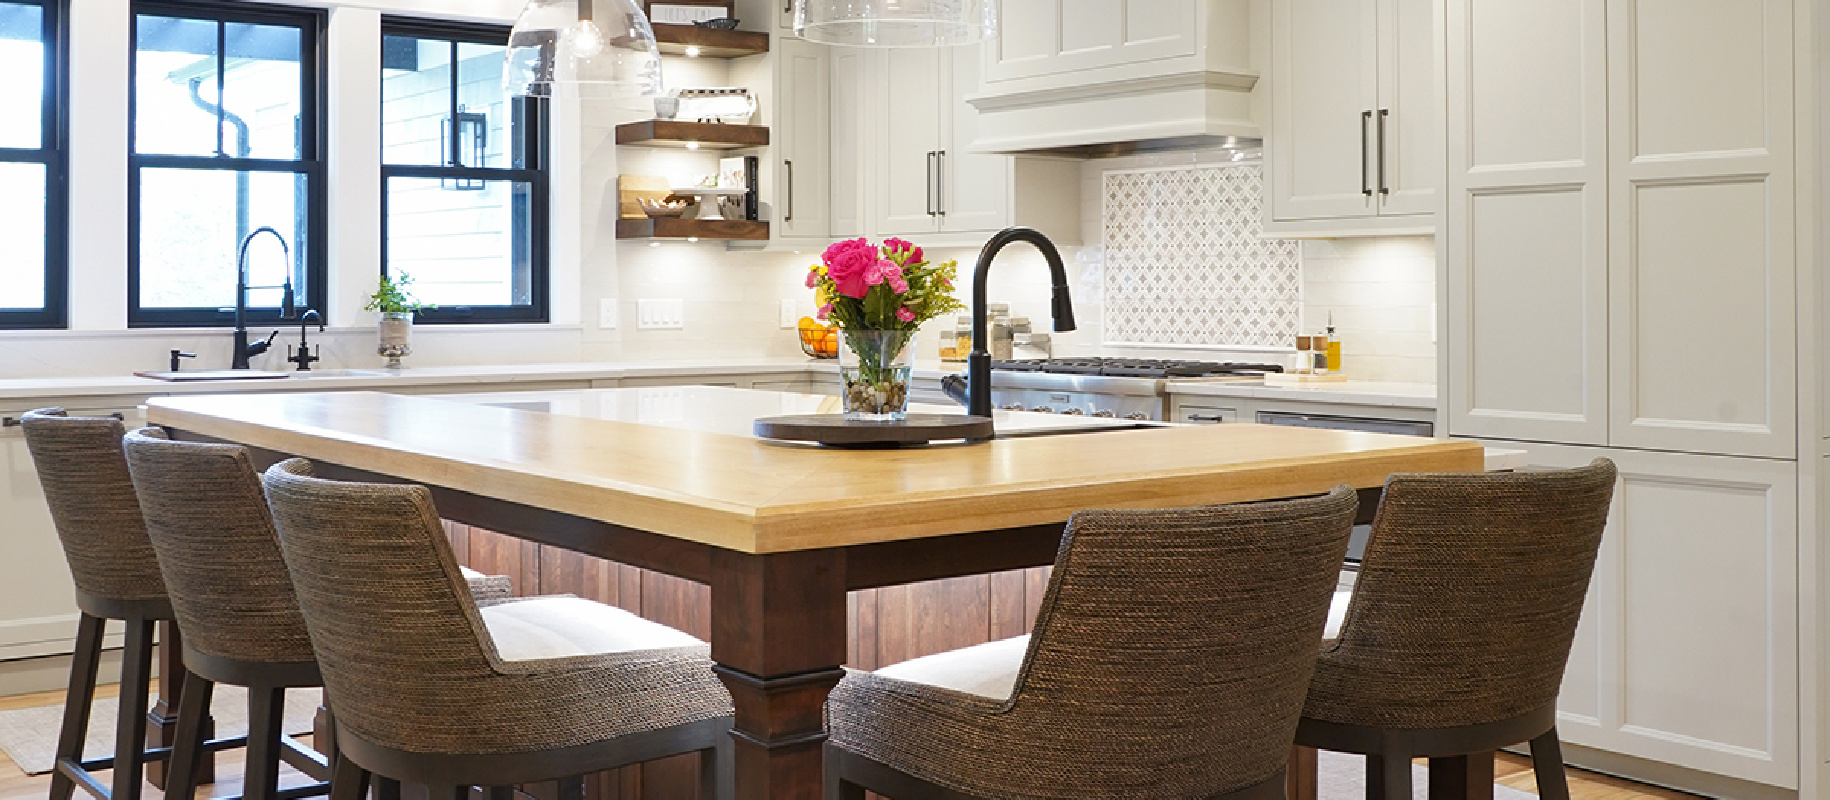 Smart Ways to Save Money on a Kitchen Remodel